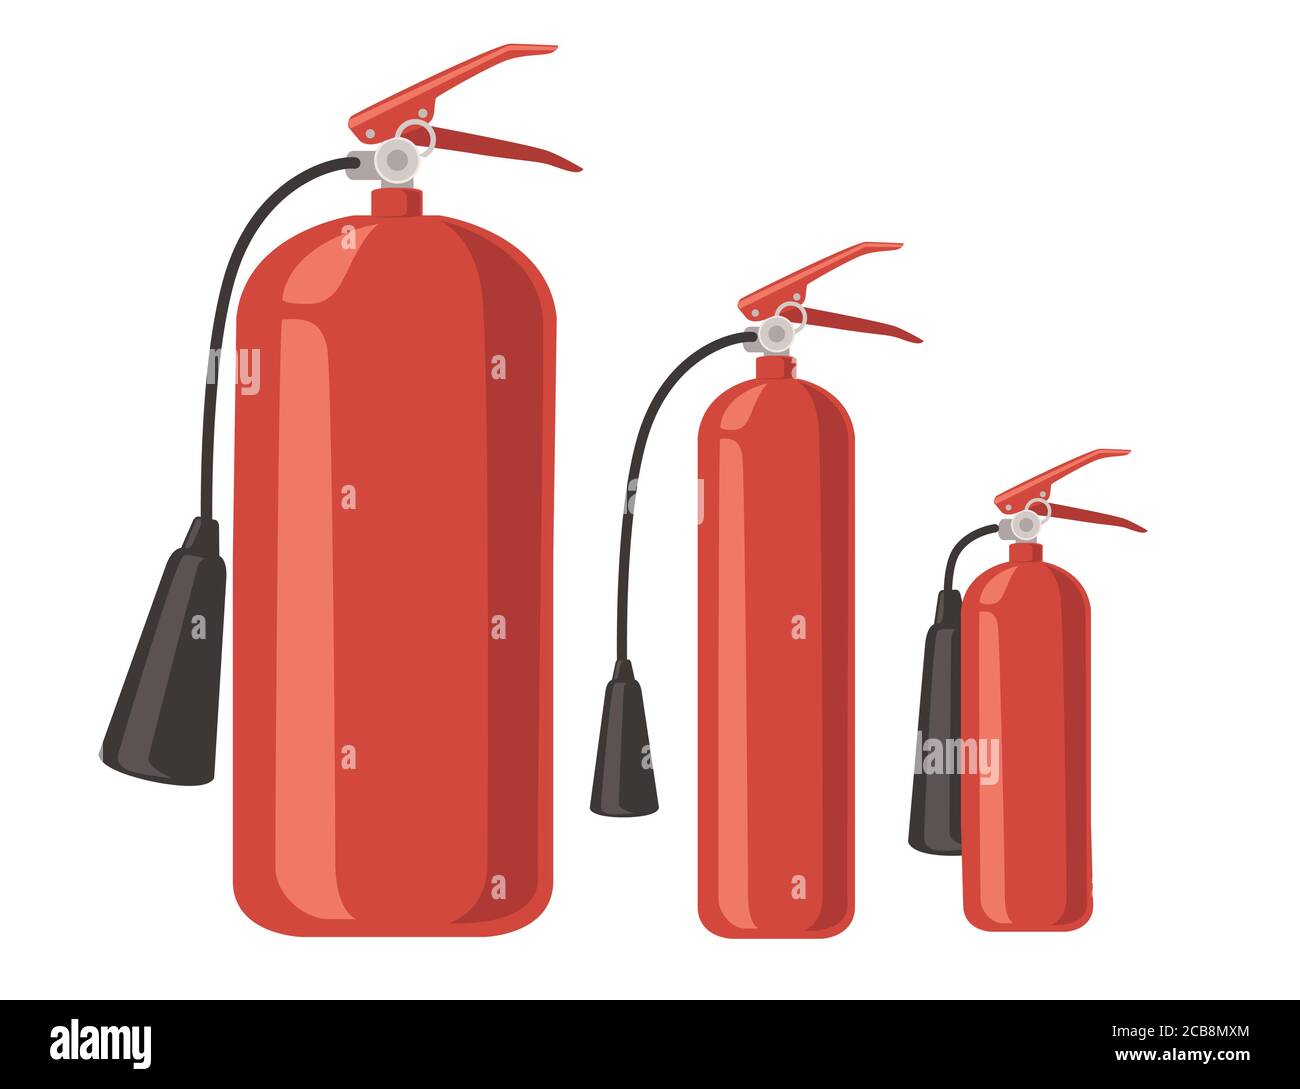 Set of different size fire extinguisher fire-fighting equipment flat vector illustration on white background Stock Vector